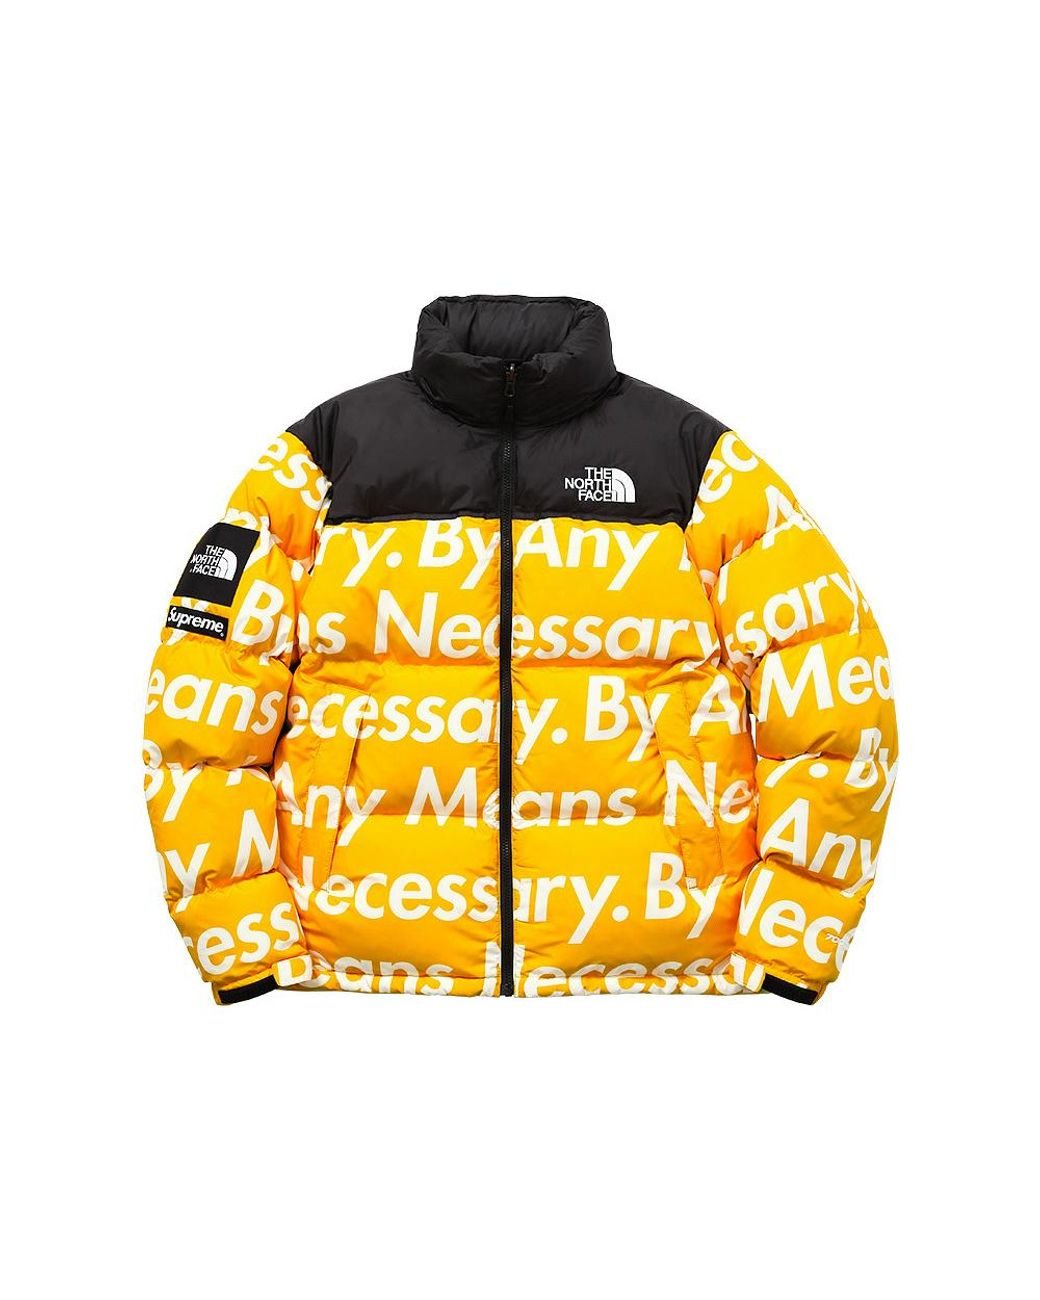 supreme north face by any means